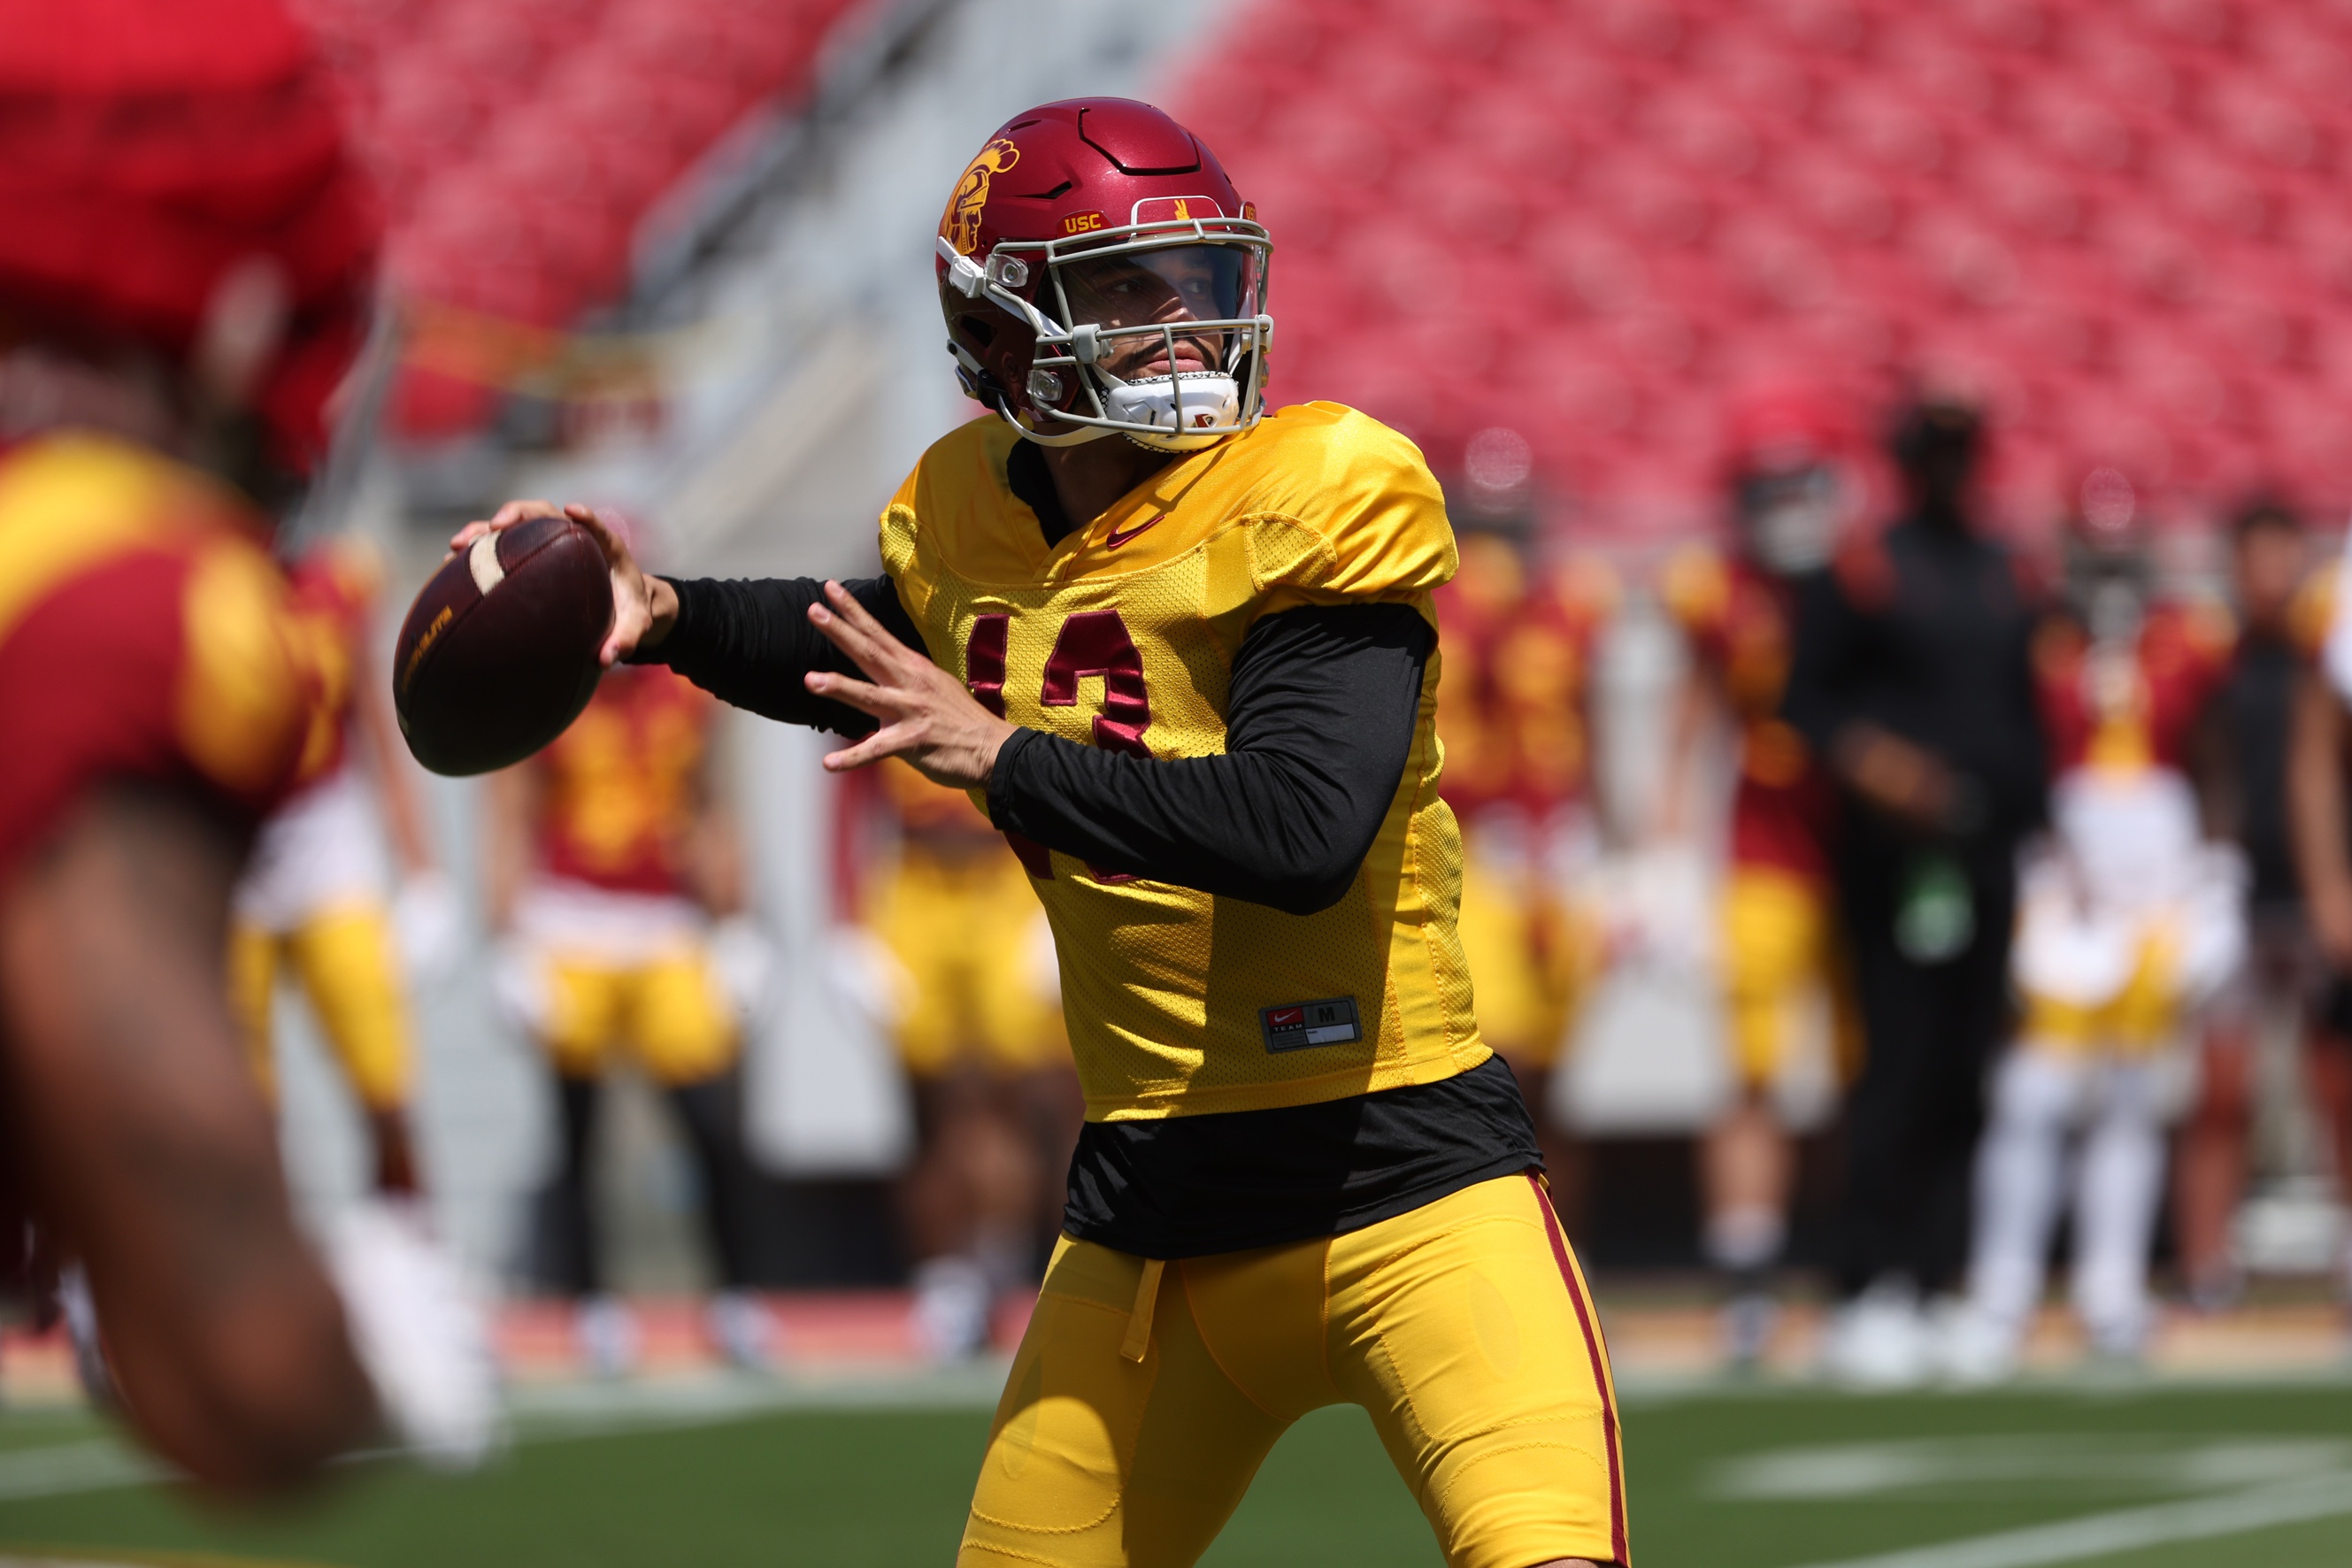 College football rule changes betting advice Caleb Williams USC Trojans